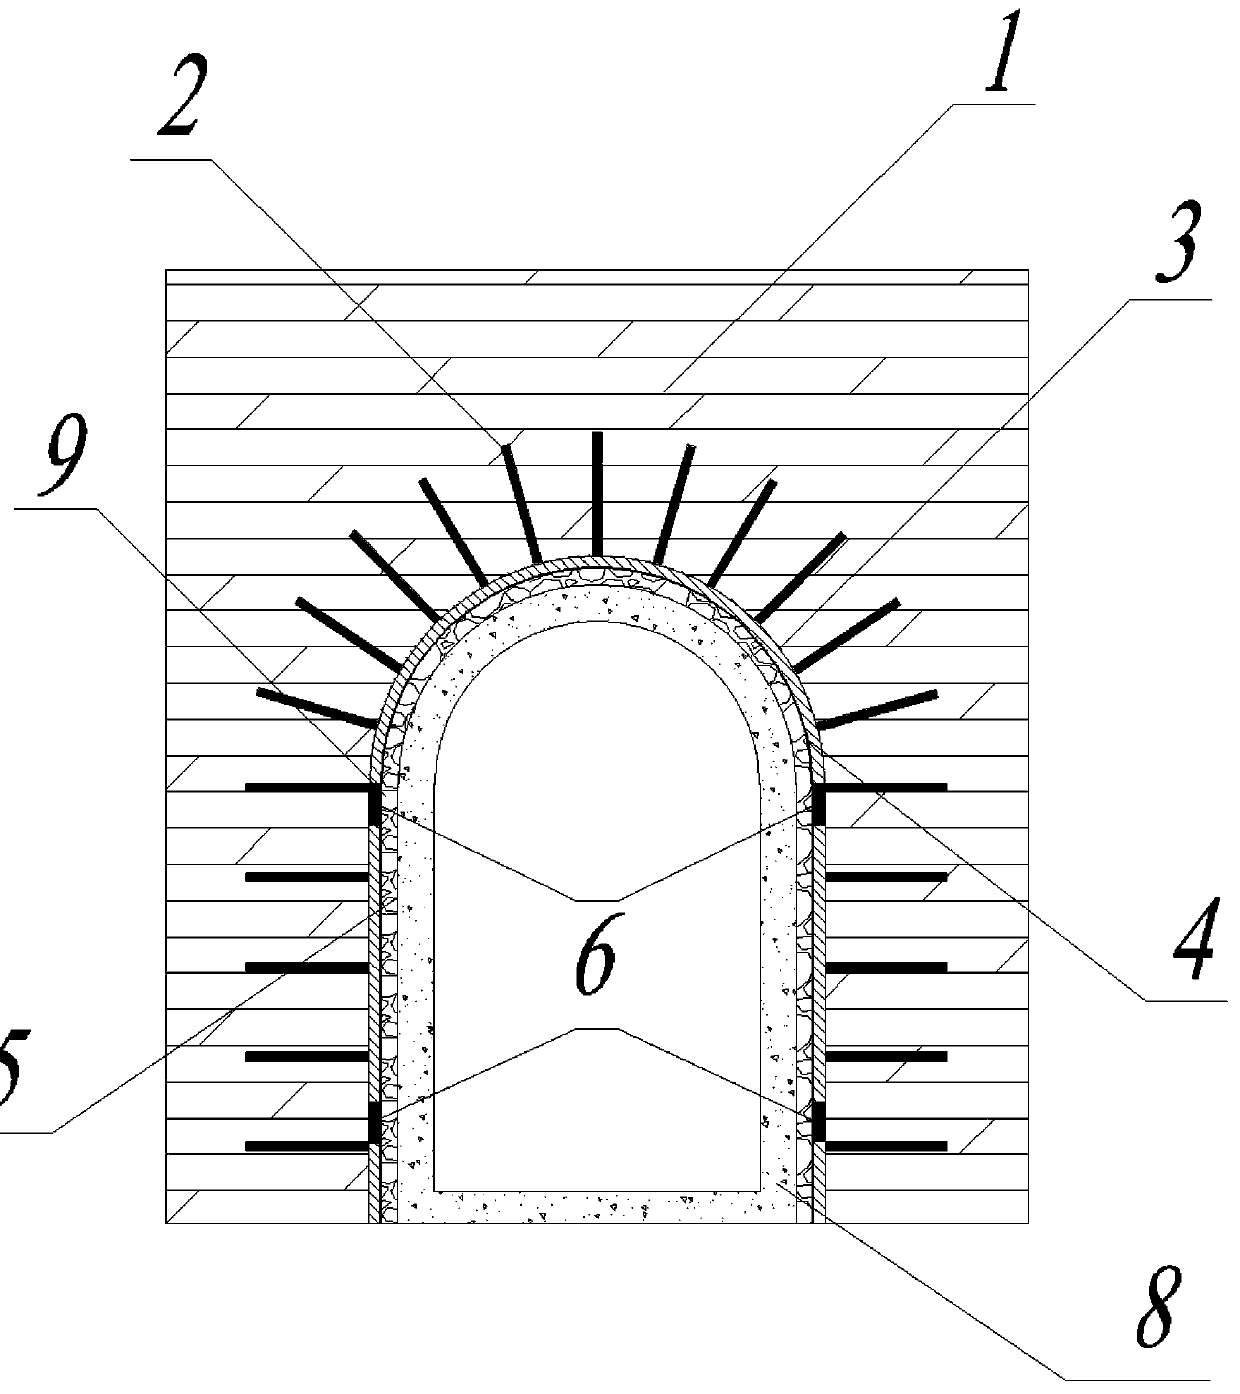 Tunnel lining structure filled with ceramic particles and construction method